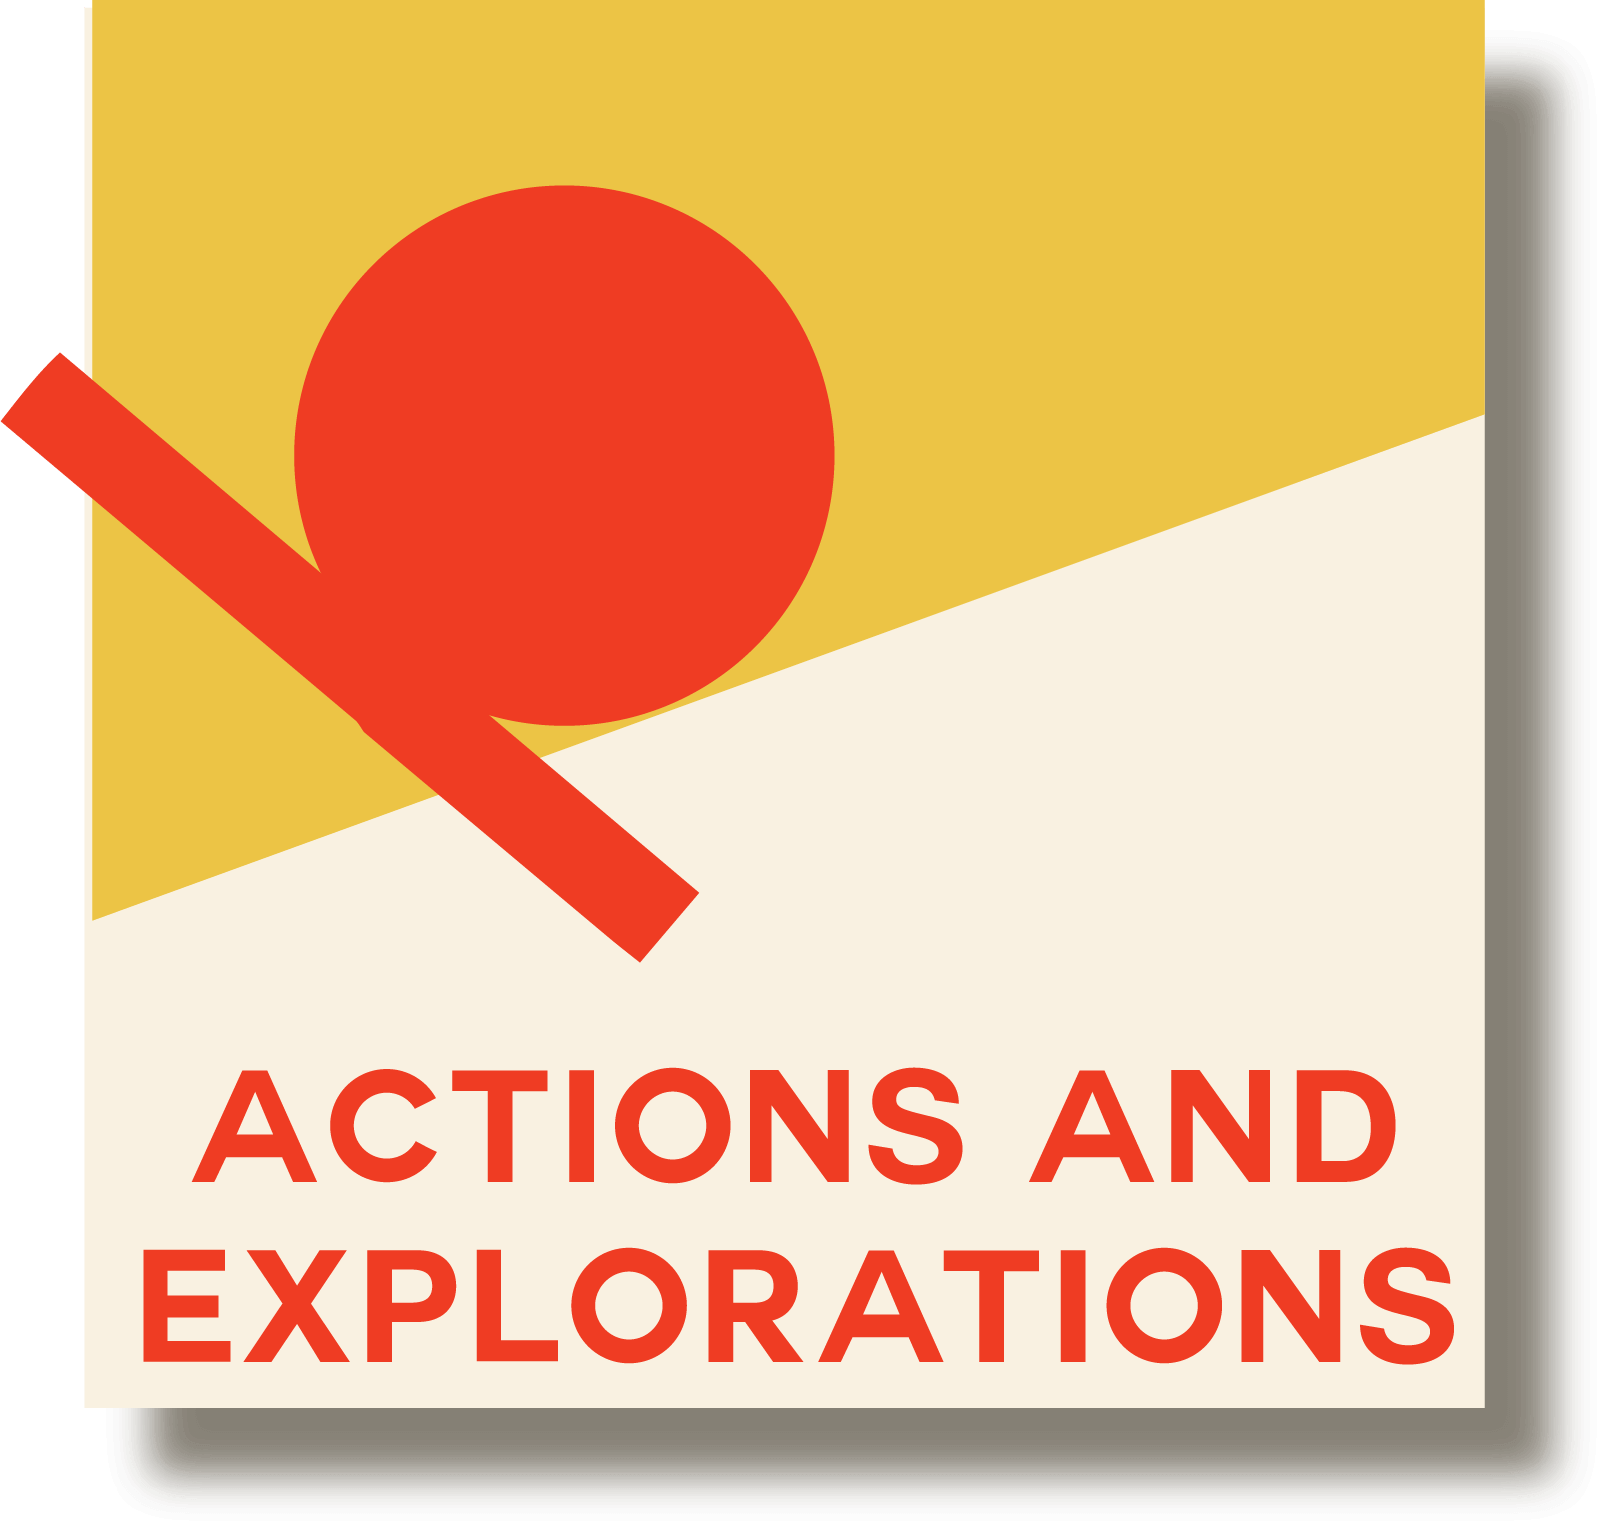 Actions and explorations